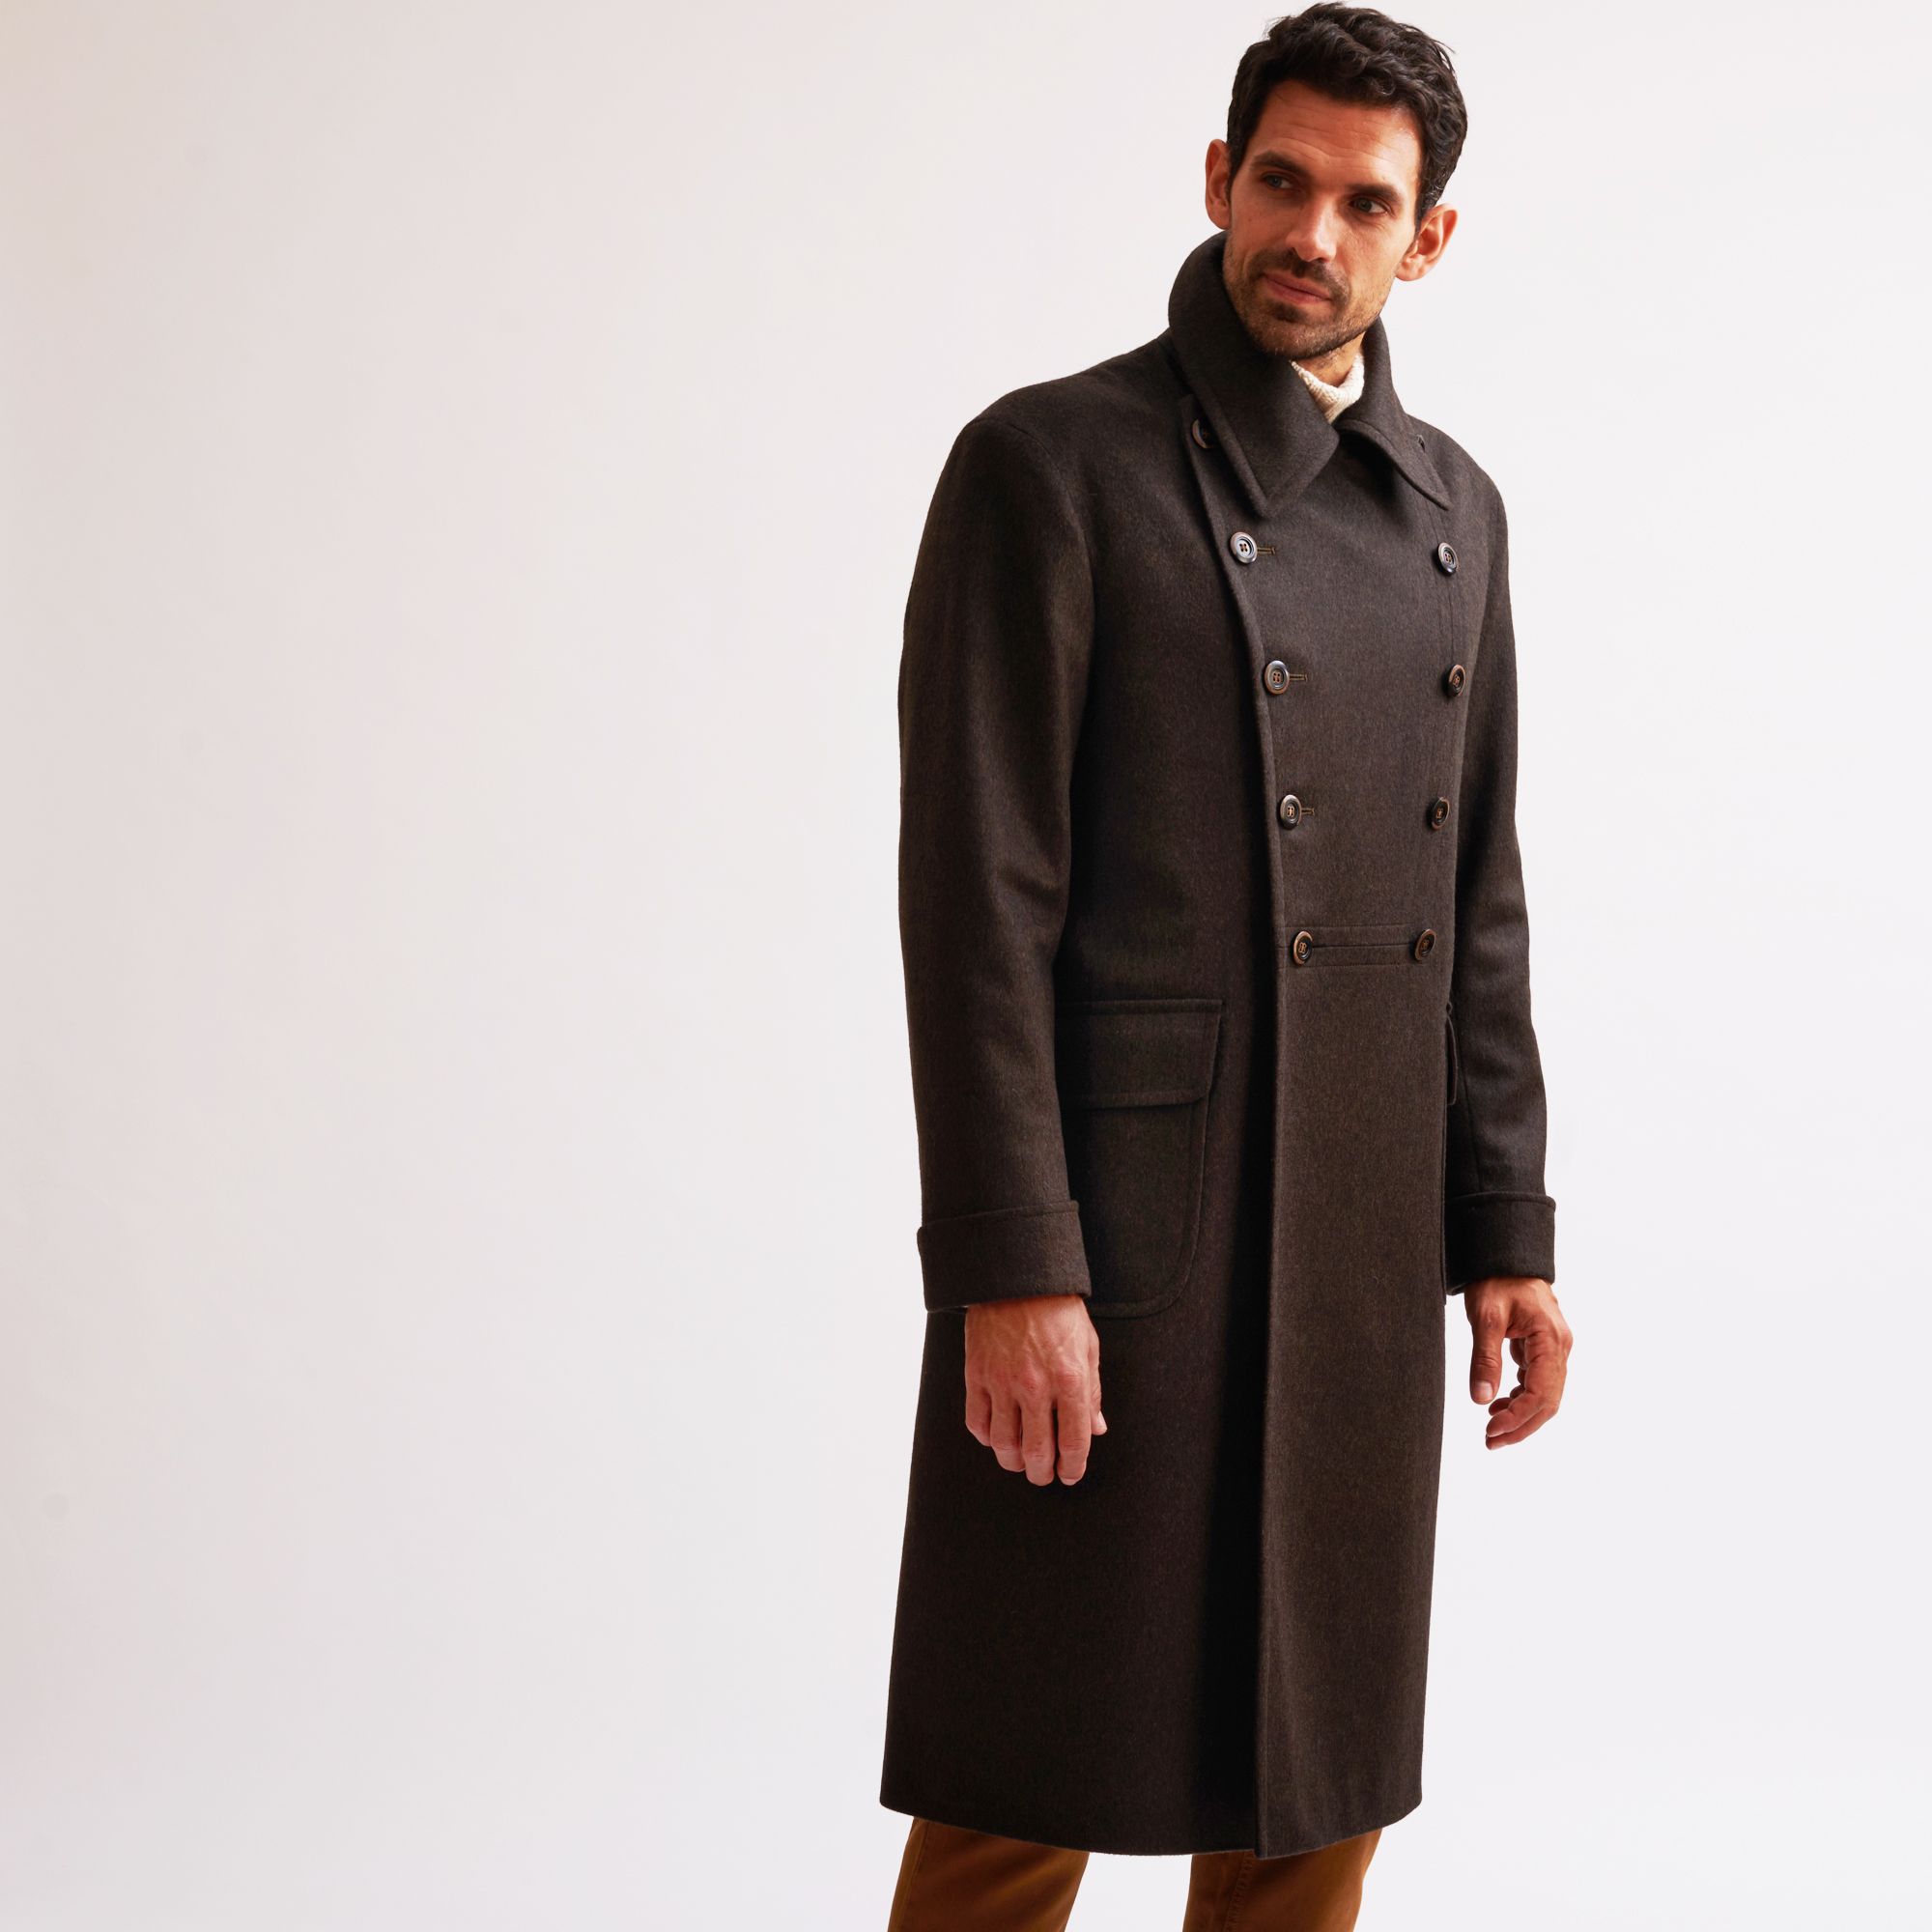 Coldstream Loden Coat | Men's Country Clothing | Cordings